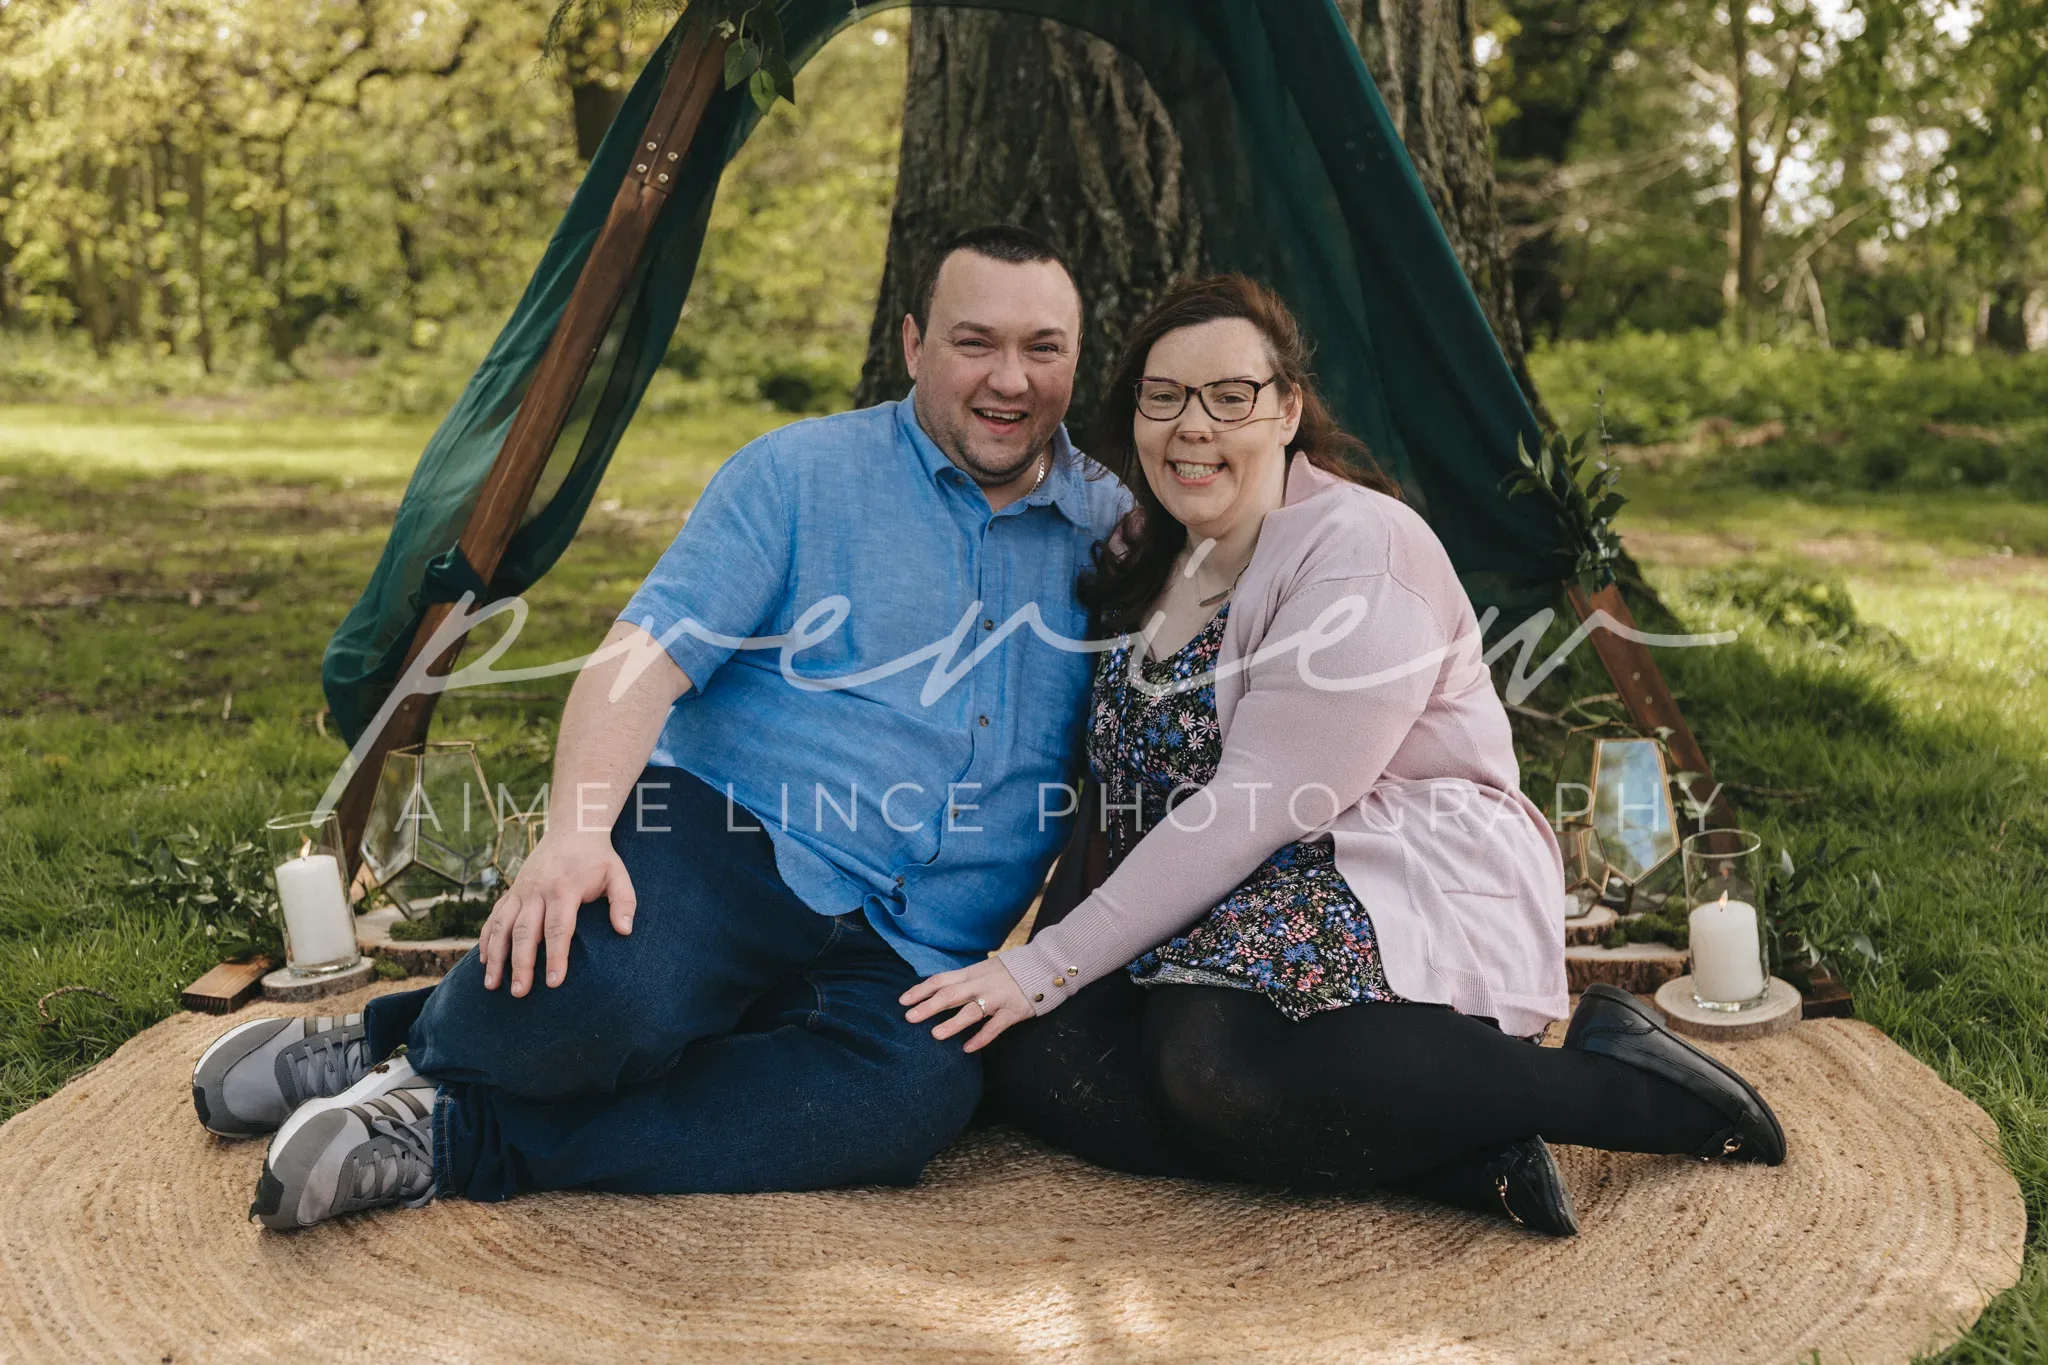 A smiling couple, Ashley and Samantha, sit on a circular rug under a tent-like structure in a lush park. Ashley wears a blue shirt and jeans; Samantha wears a floral dress and cardigan.